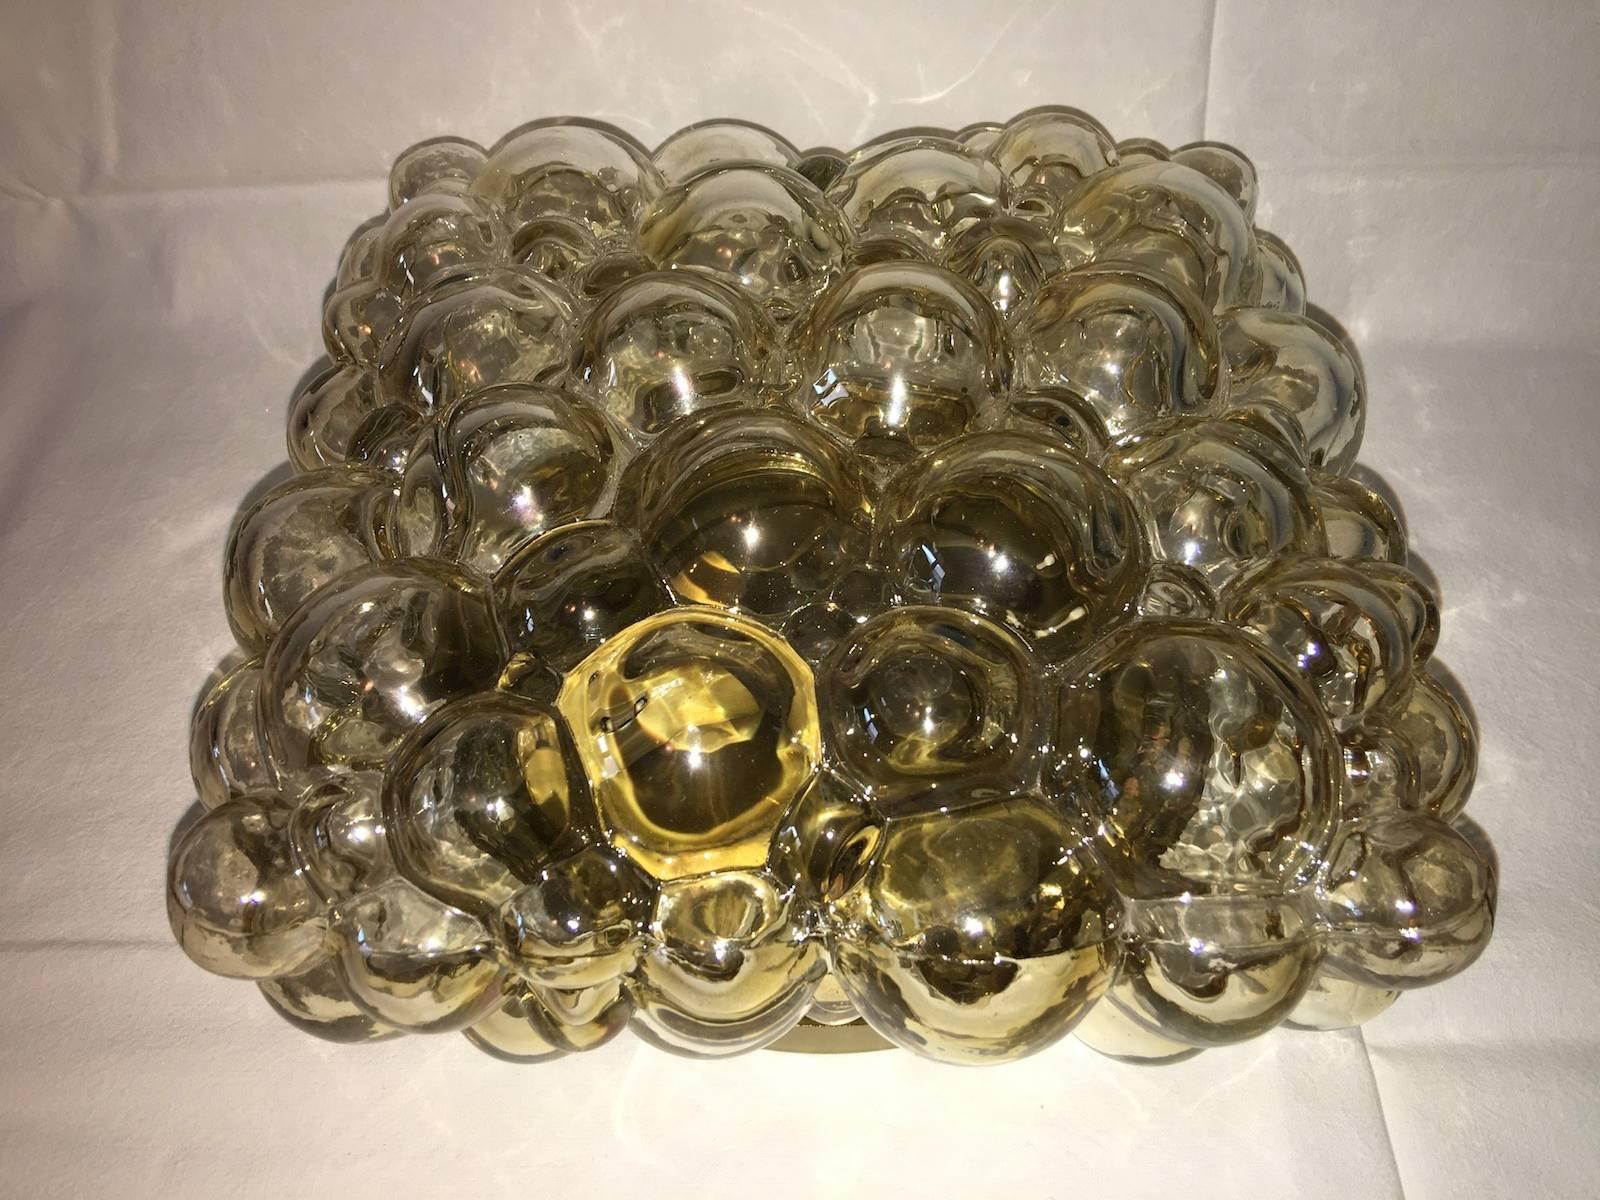 A stunning, vintage German made bubble glass flush mount wall light or sconce designed by Helena Tynell for Glashütte Limburg in the early 1960s. Featuring beautiful Amber/ Champagne colored/ coloured glass it warms up any heart, mind or room. The